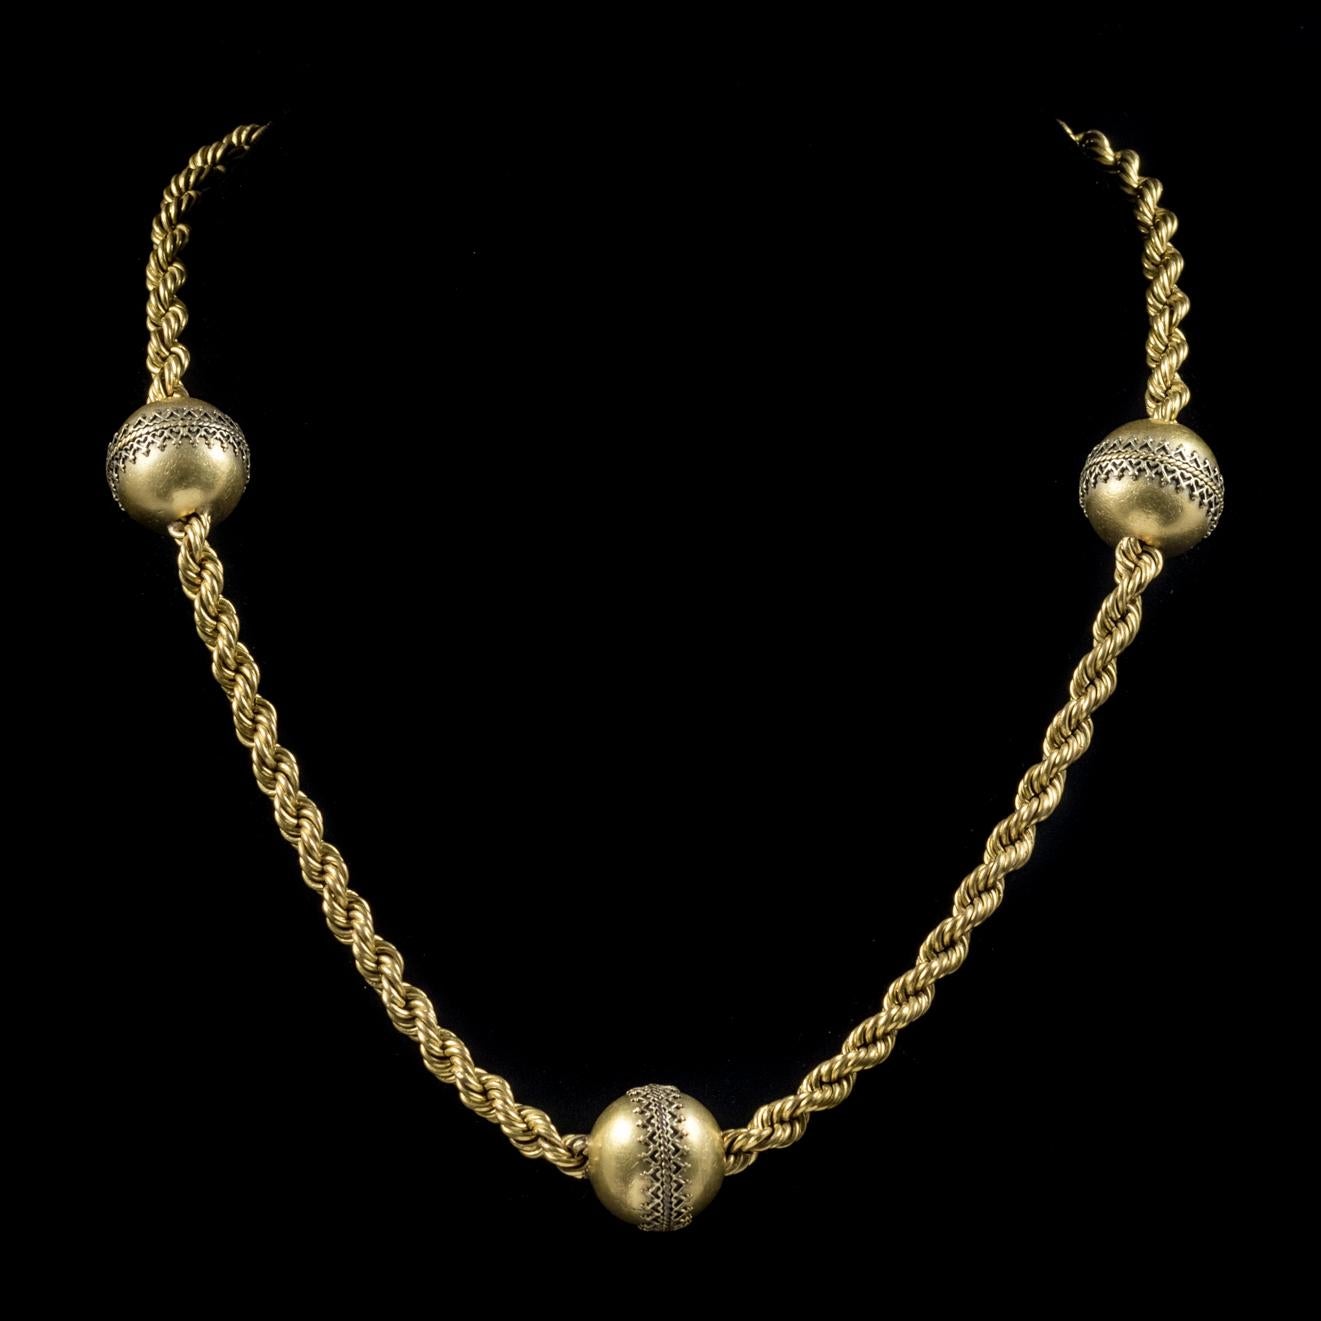 This genuine antique Cannetille Gold ball necklace is from the Victorian era, Circa 1860.

The heavy rope twist chain is beautifully made and features three large Cannetille balls across the piece. 

Cannetille is an intricate three dimensional